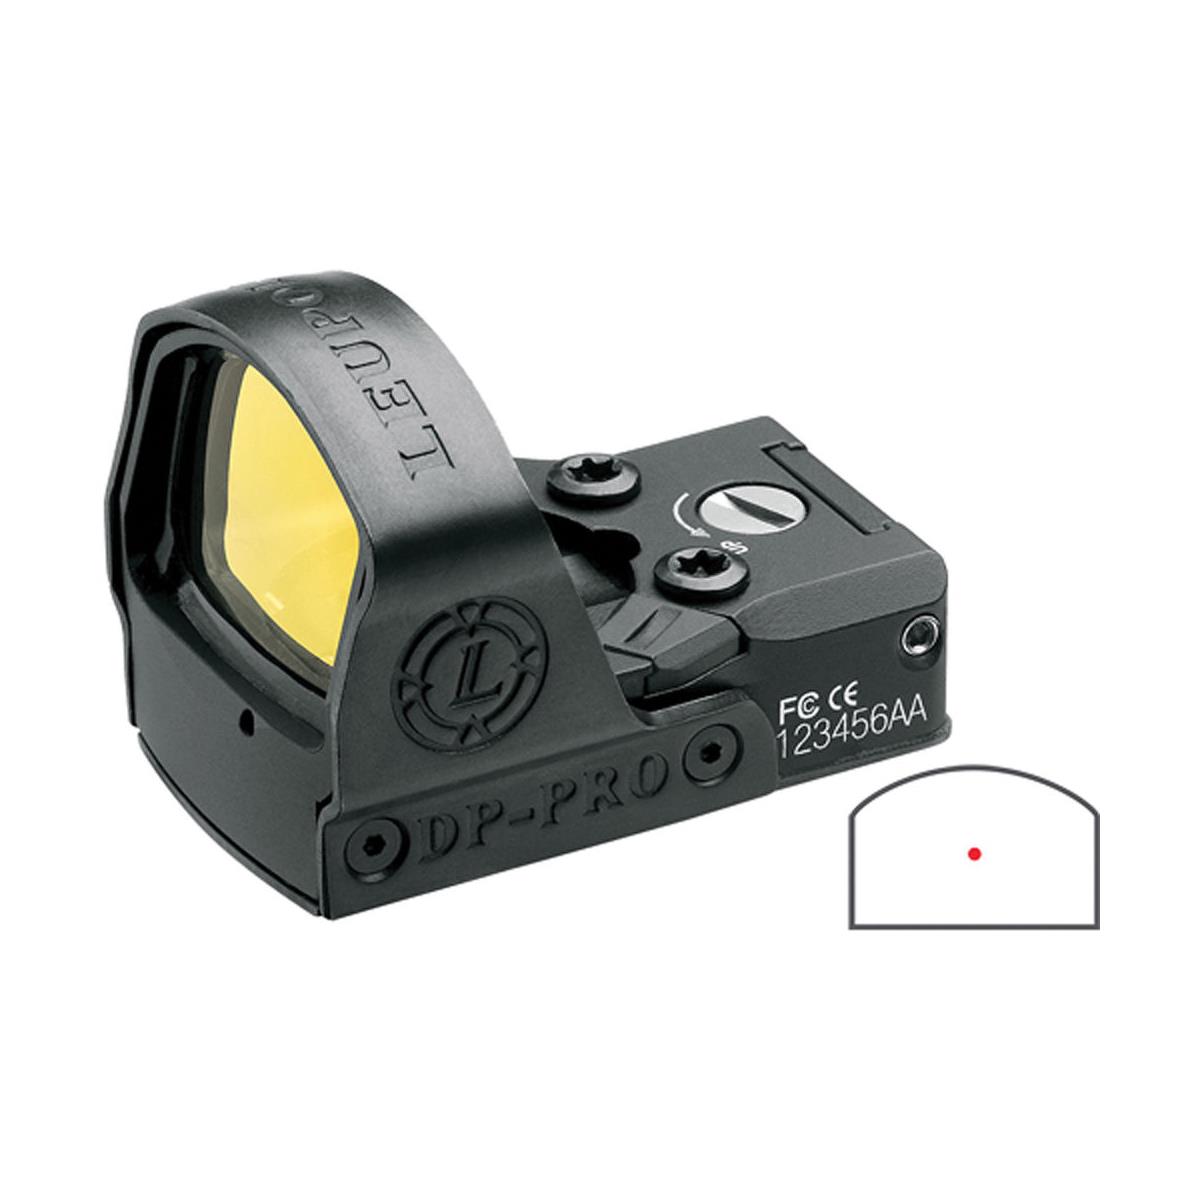 Image of Leupold DeltaPoint Pro Reflex Sight